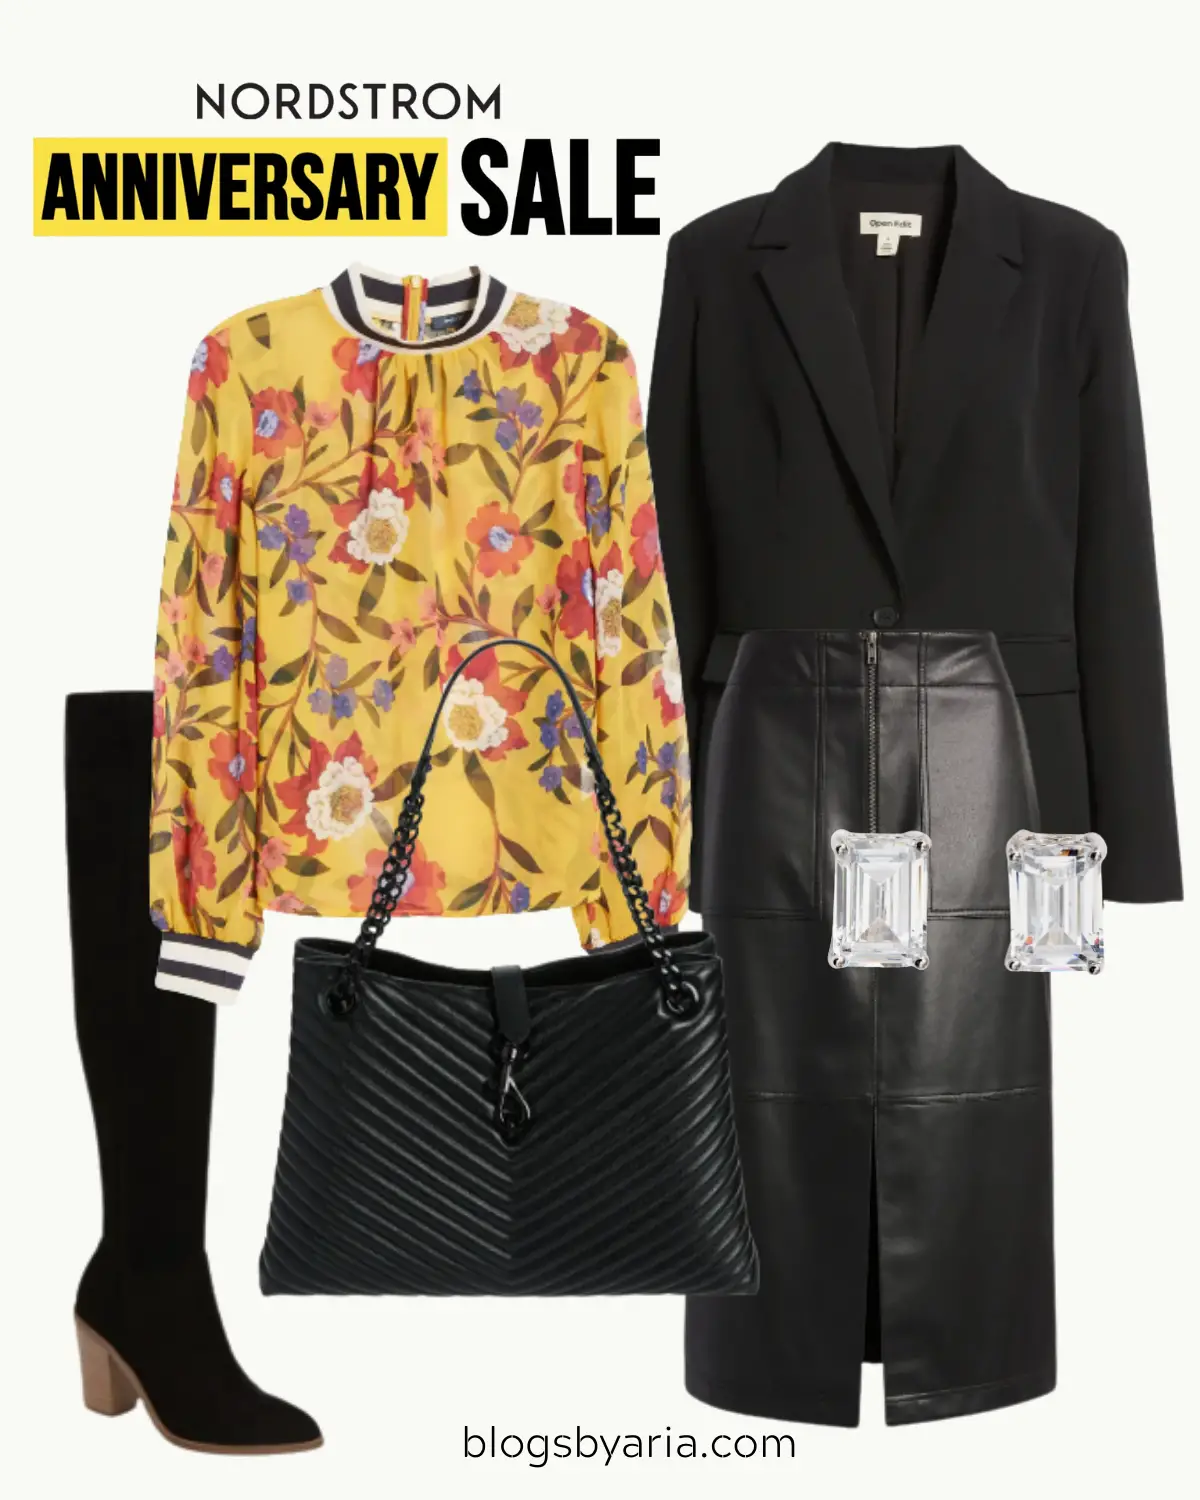 nordstrom anniversary sale outfit inspo